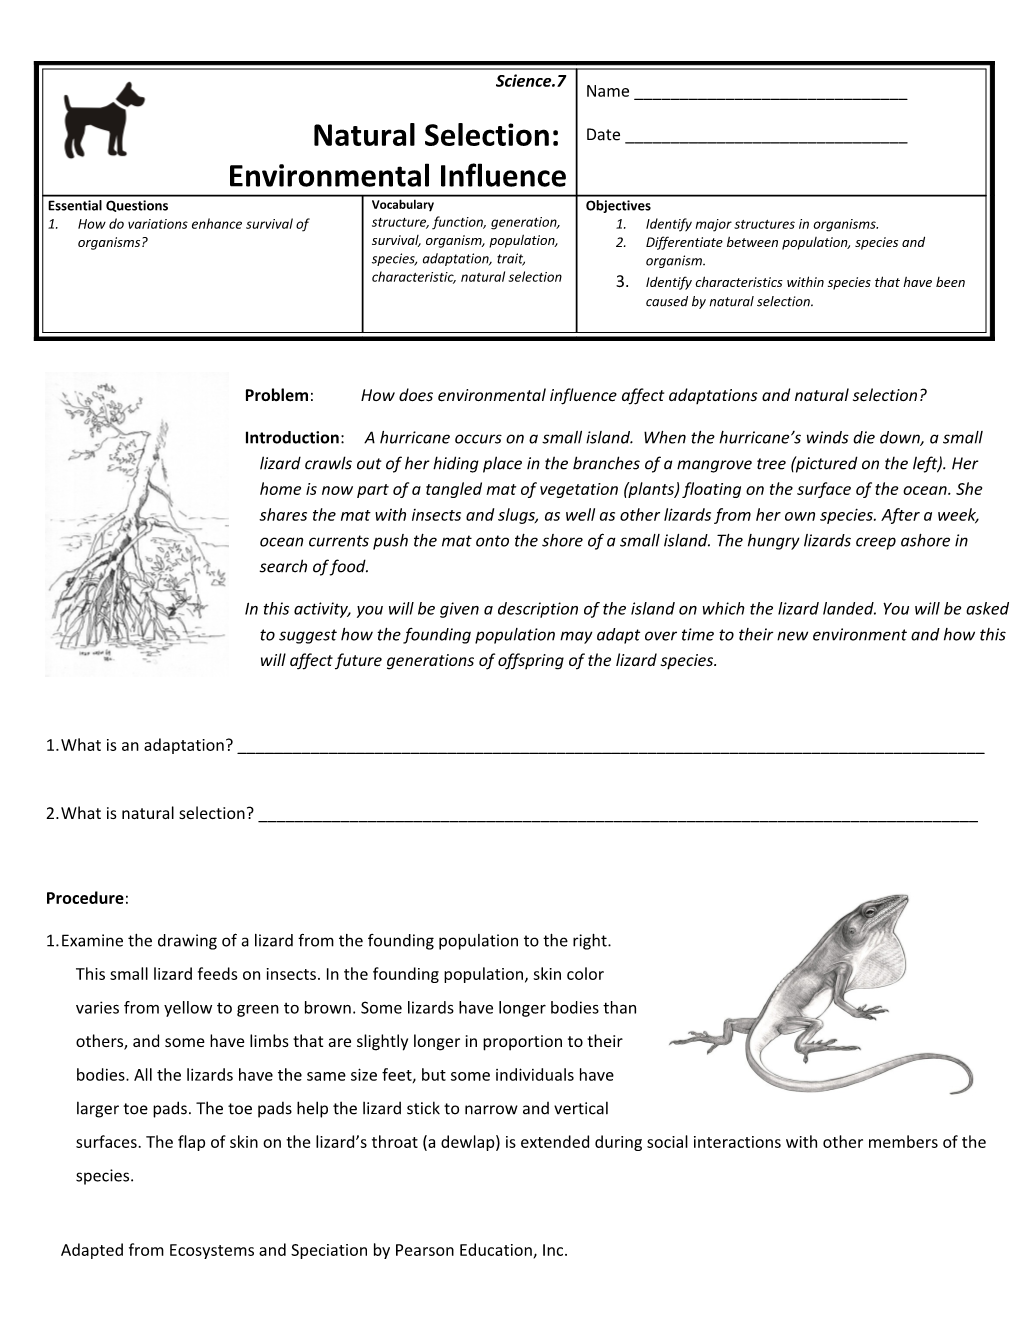 Problem: How Does Environmental Influence Affect Adaptations and Natural Selection?